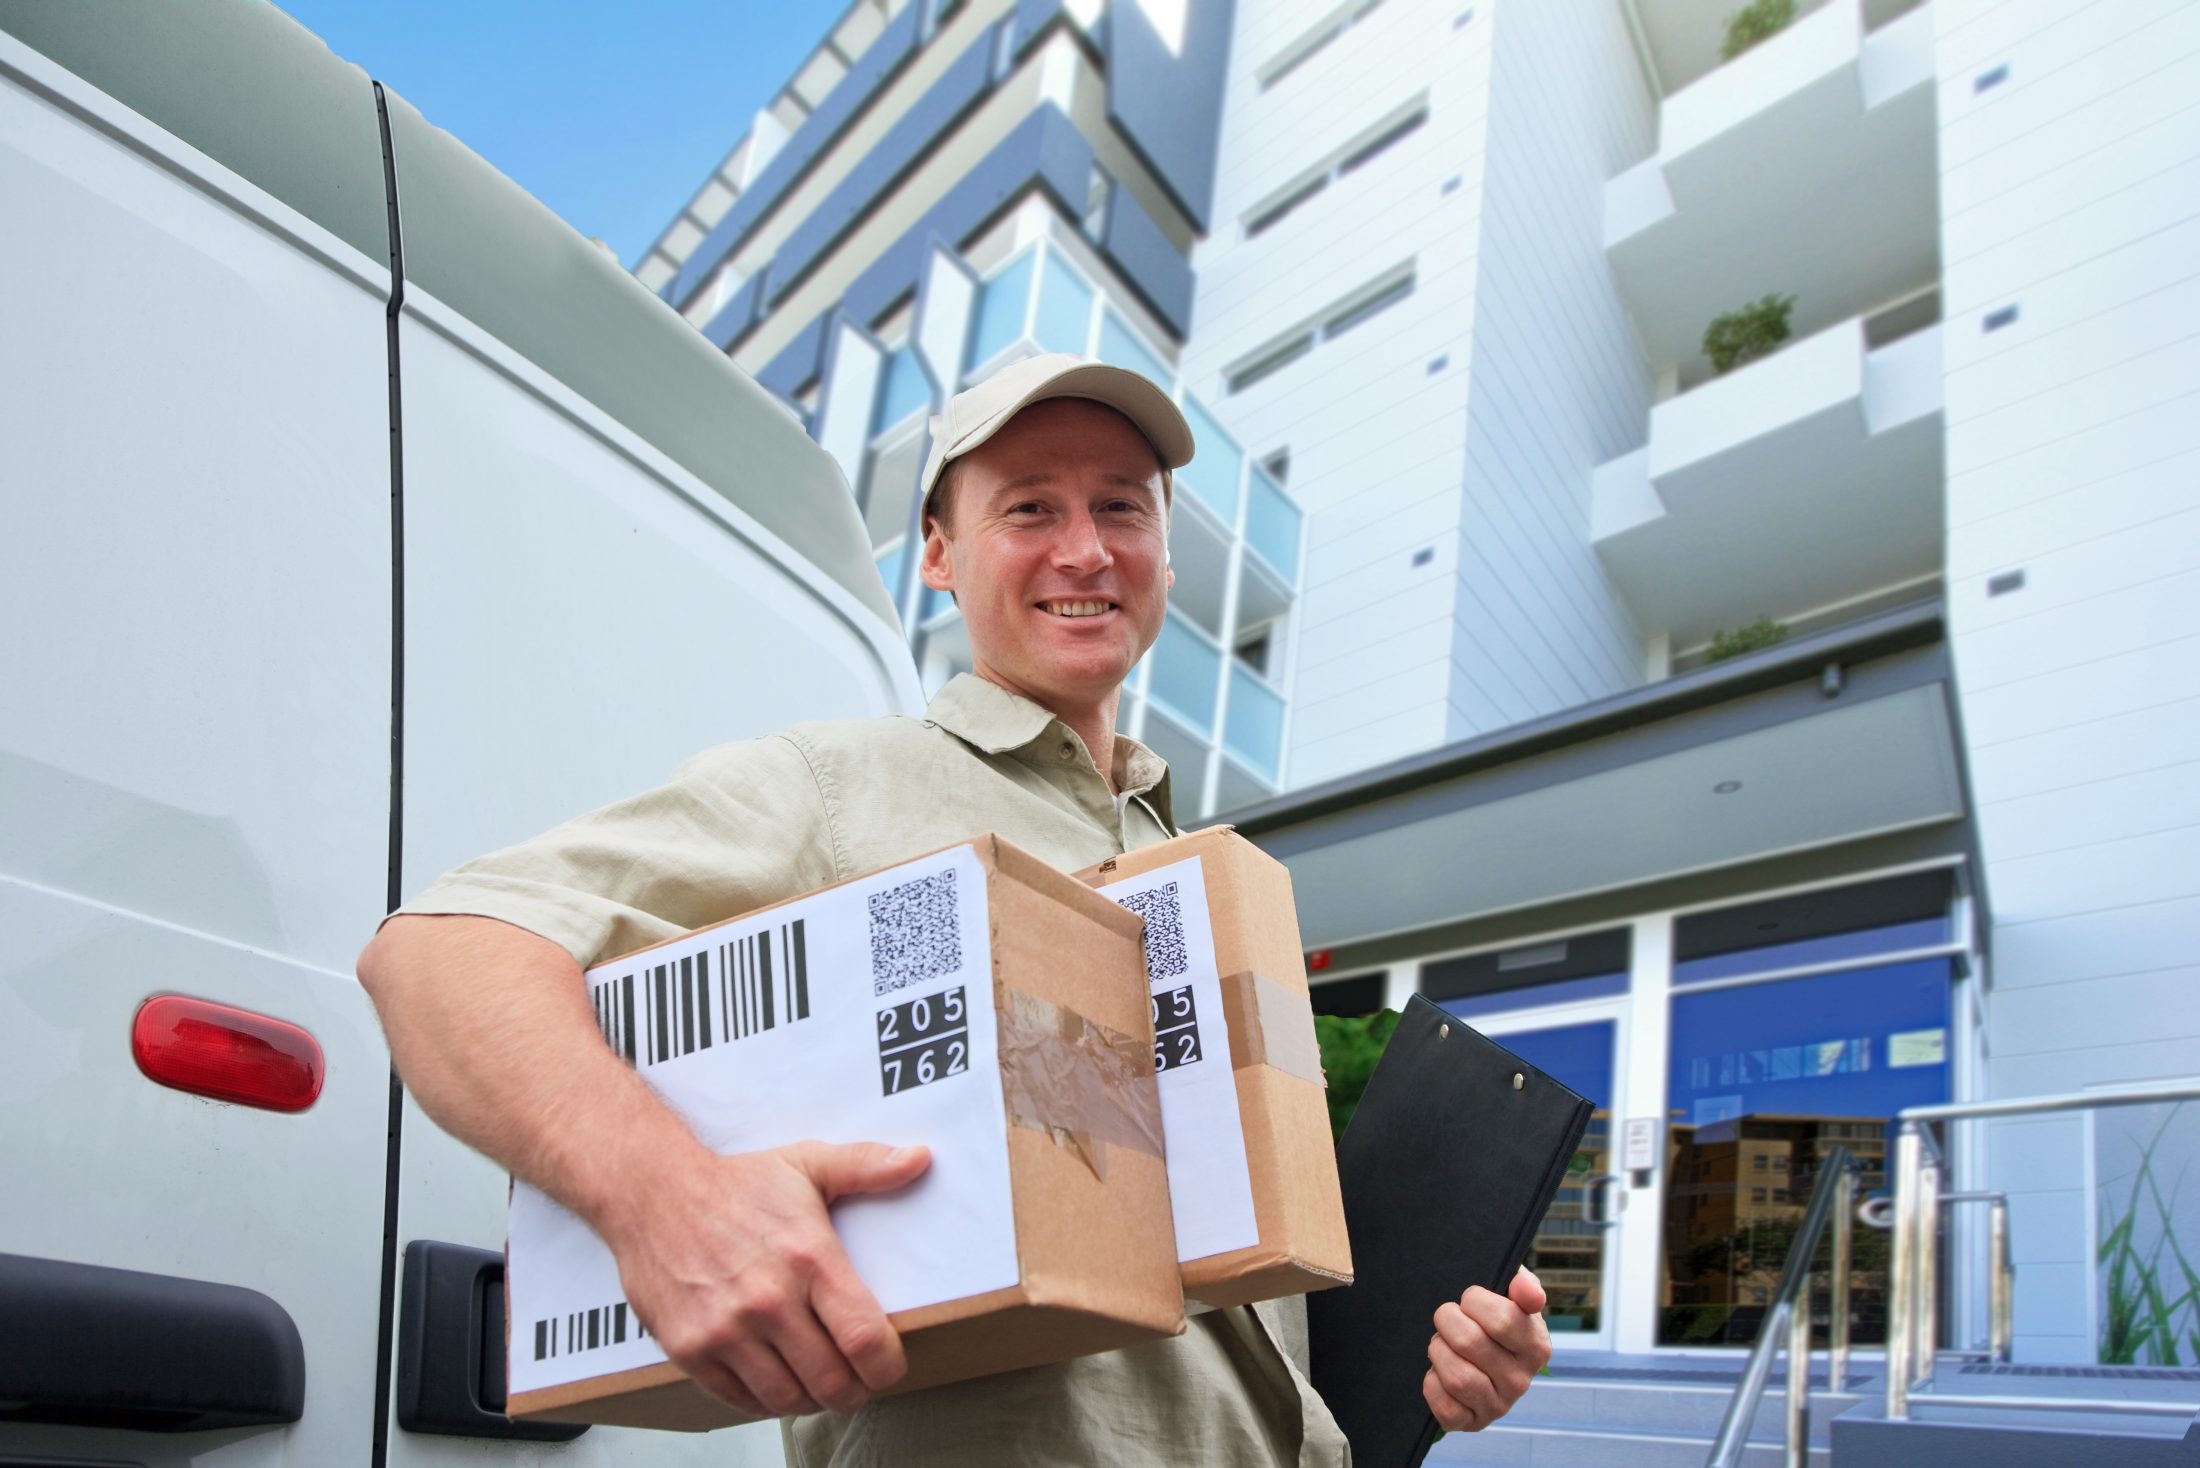 Parcel Delivery Challenges Within Build-to-rent Complexes